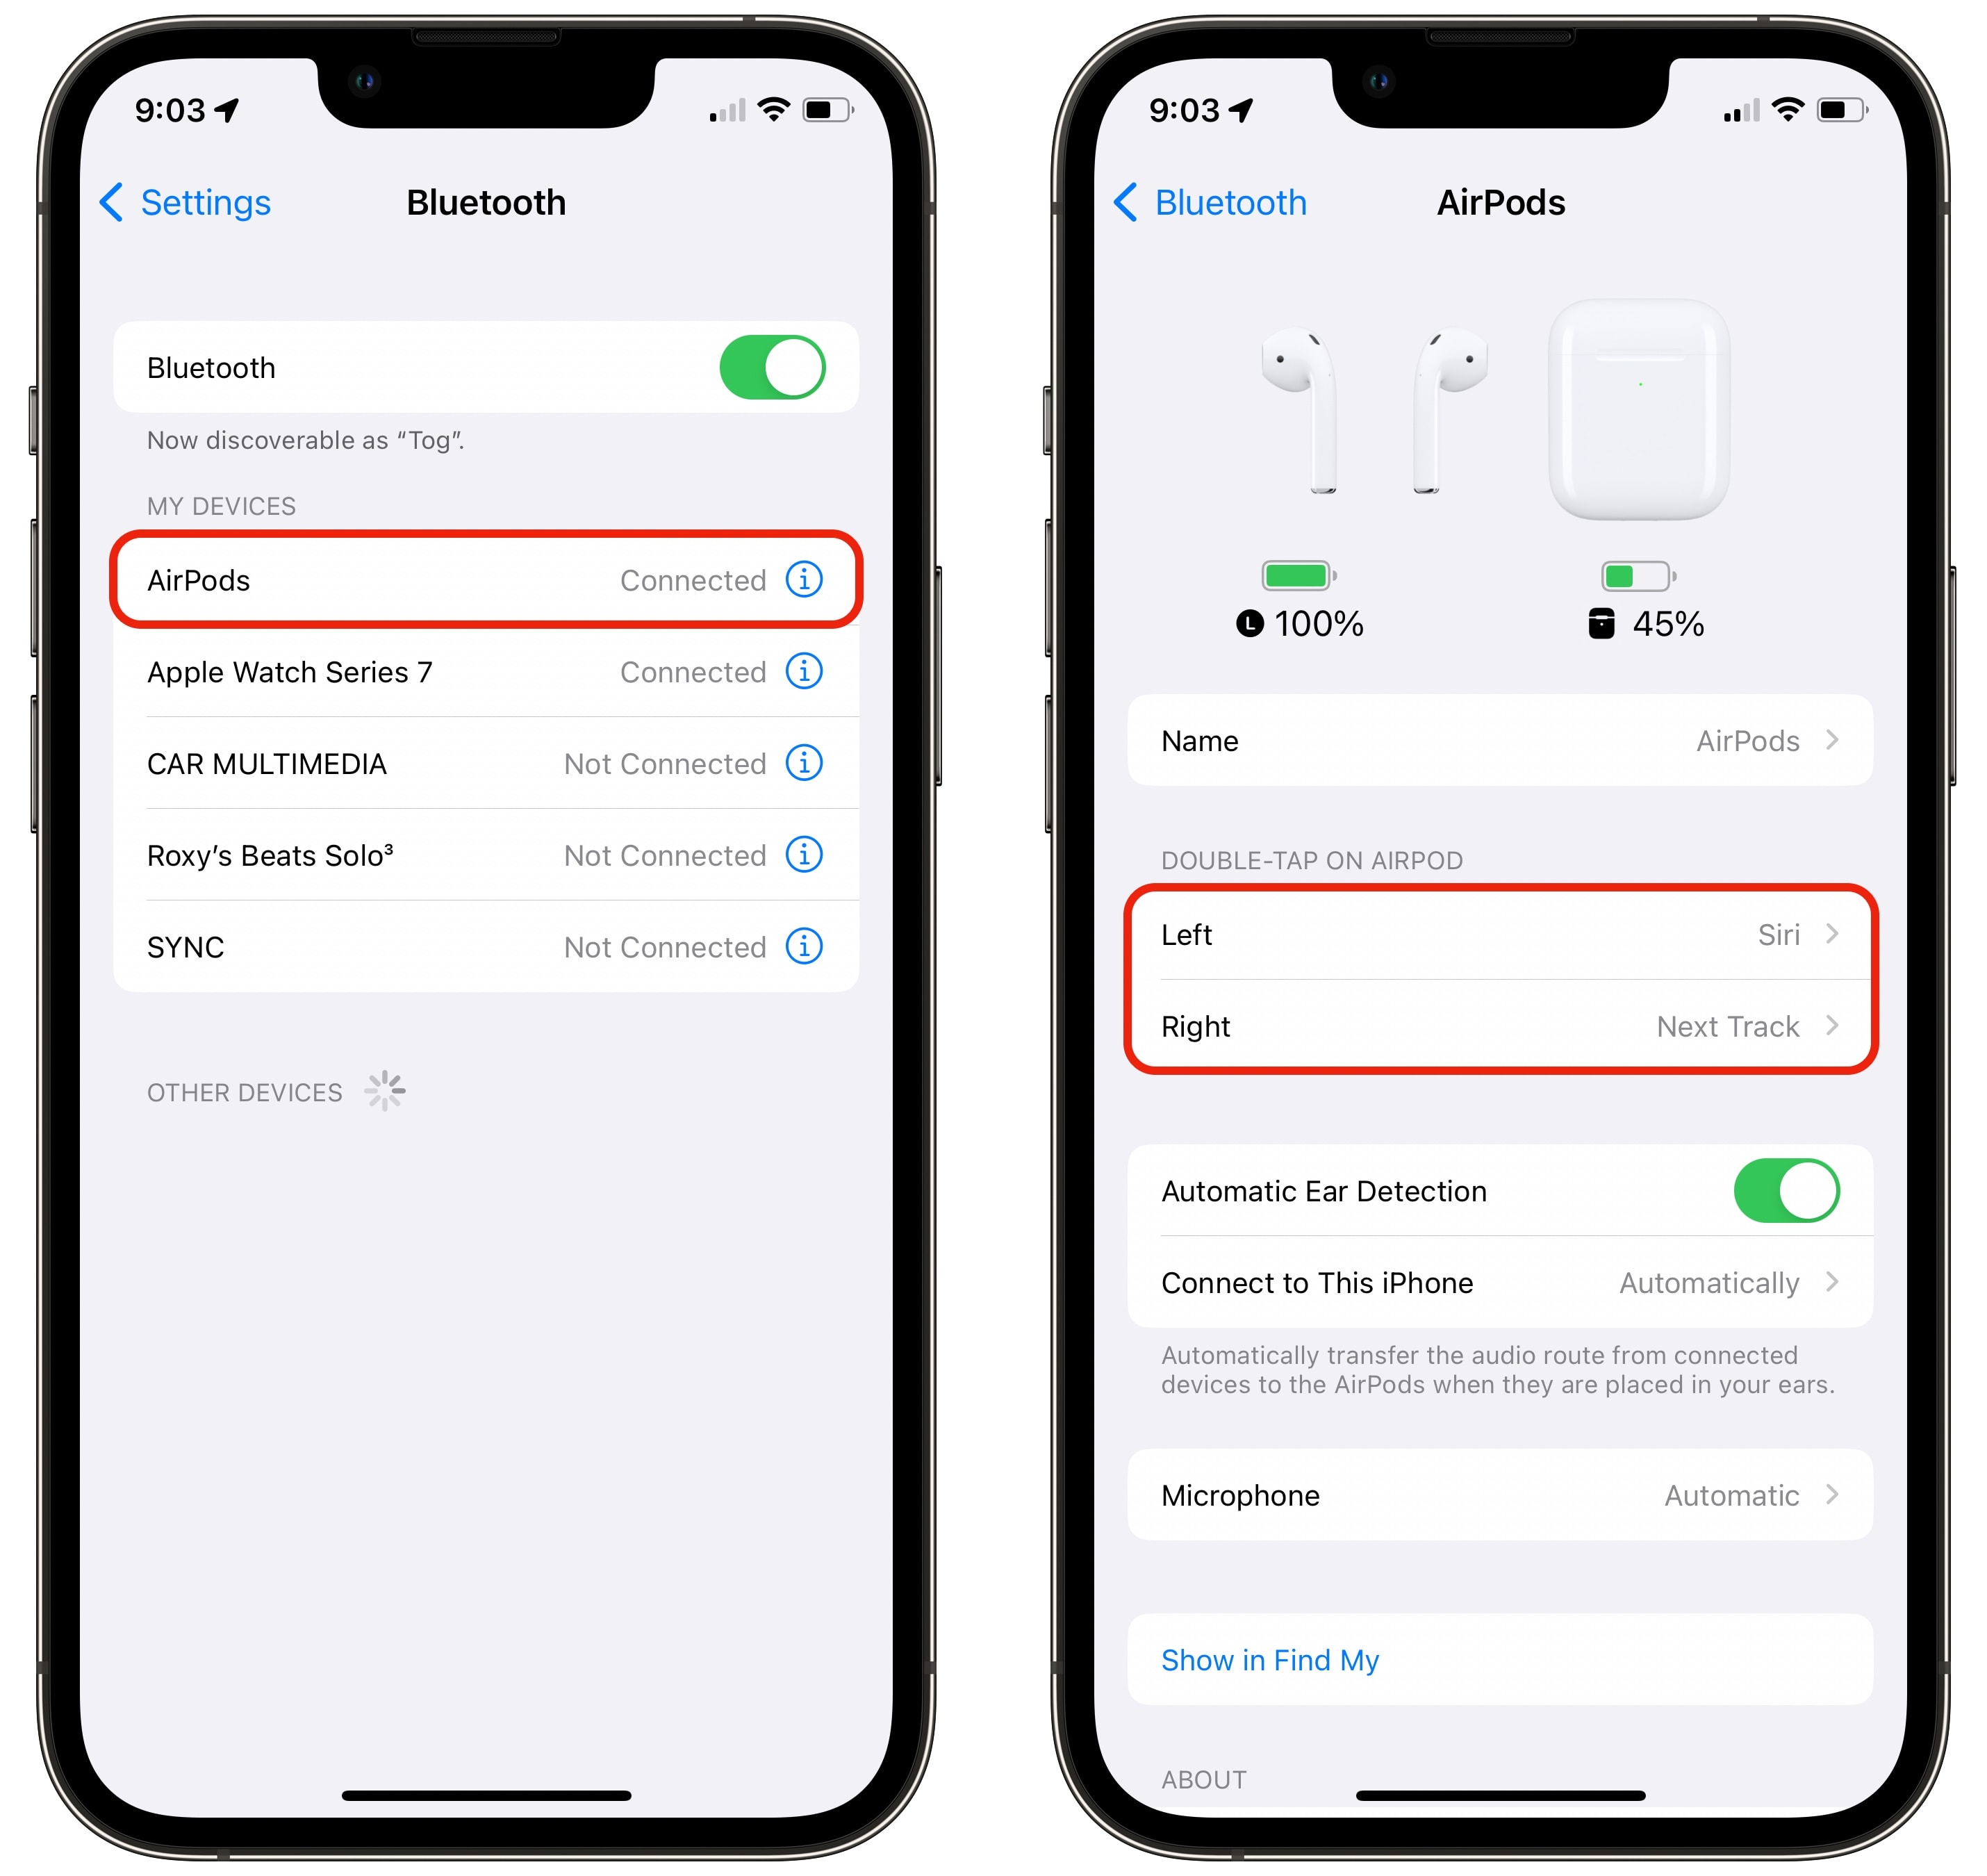 Siri can be activated by either tapping or squeezing your AirPod depending on the model.